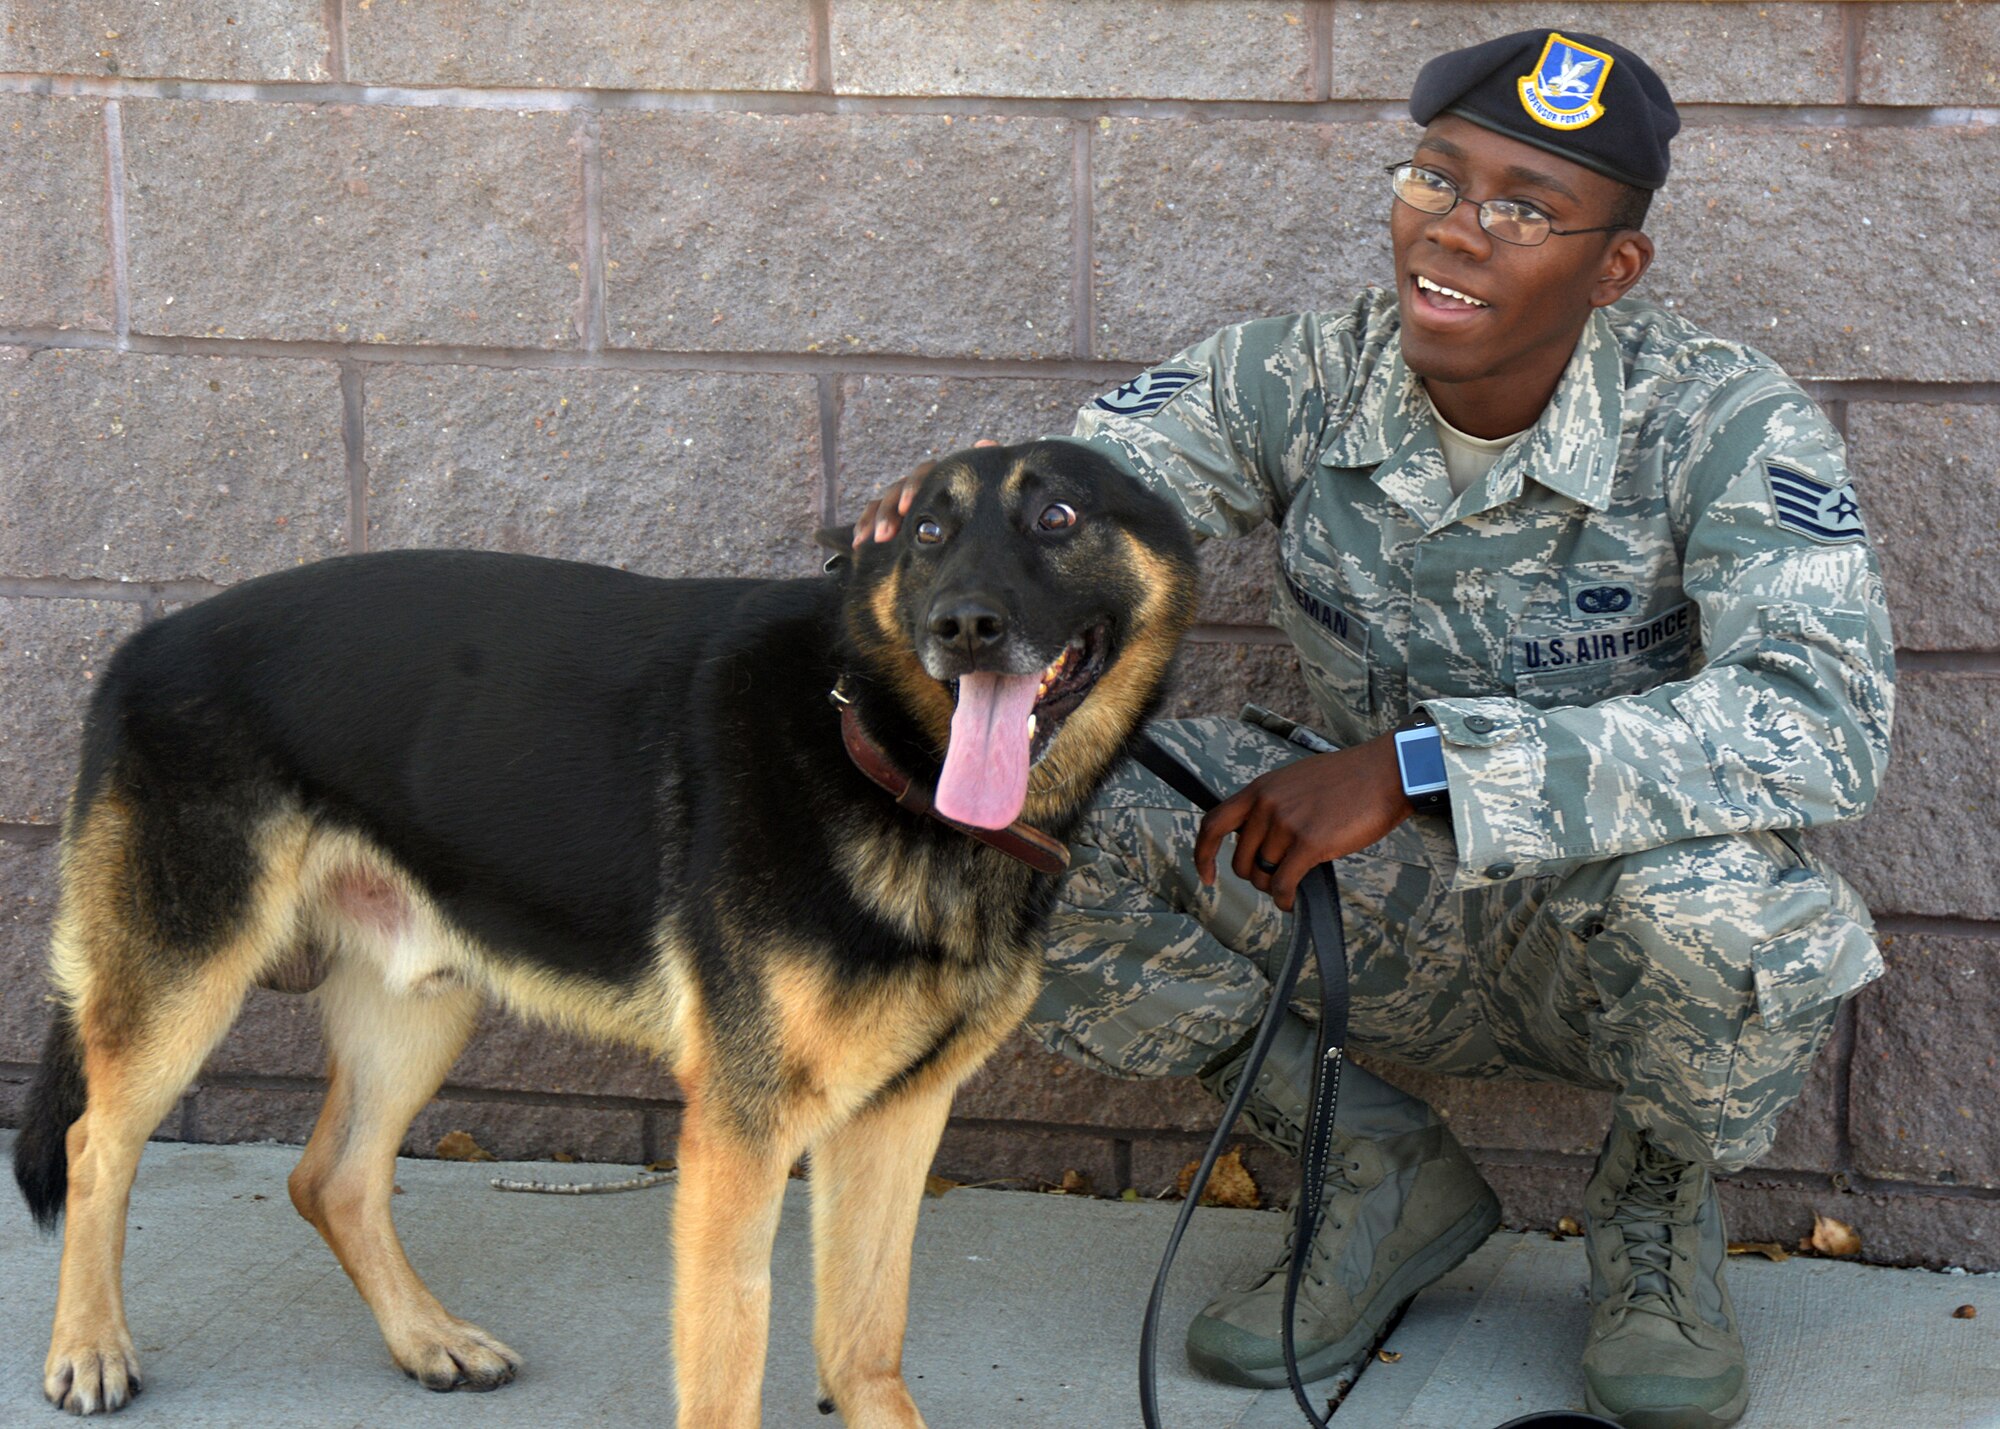 Staff Sgt. Elbert Foreman, 55th Security Force Squadron Military Working Dog handler, crouches beside Military Working Dog Rocky Oct. 21 at the 55th SFS MWD training facility. MWD Rocky was relocated to Offutt for training after he was unable to meet training requirements at Joint Base San Antonio, Texas. (U.S. Air Force photo by Kendra Williams/Released)